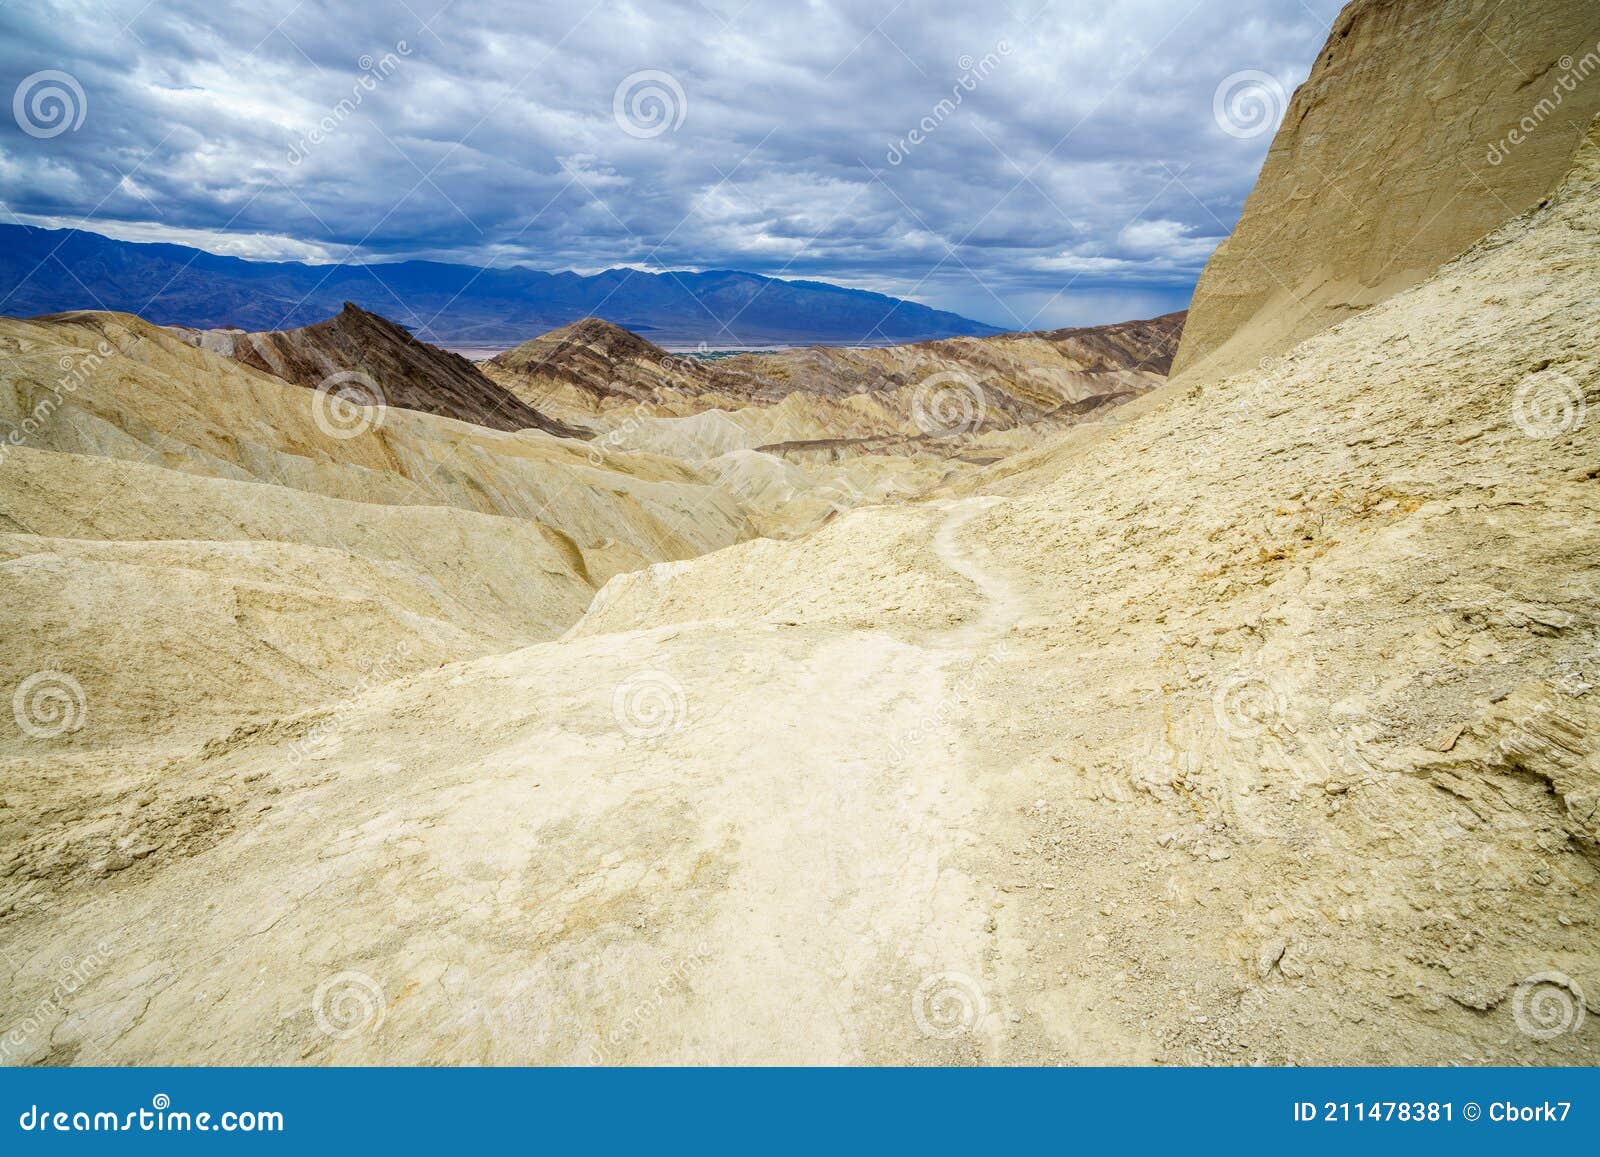 Hikink the Golden Canyon - Gower Gulch Circuit in Death Valley, California,  Usa Stock Image - Image of gower, blue: 211478381